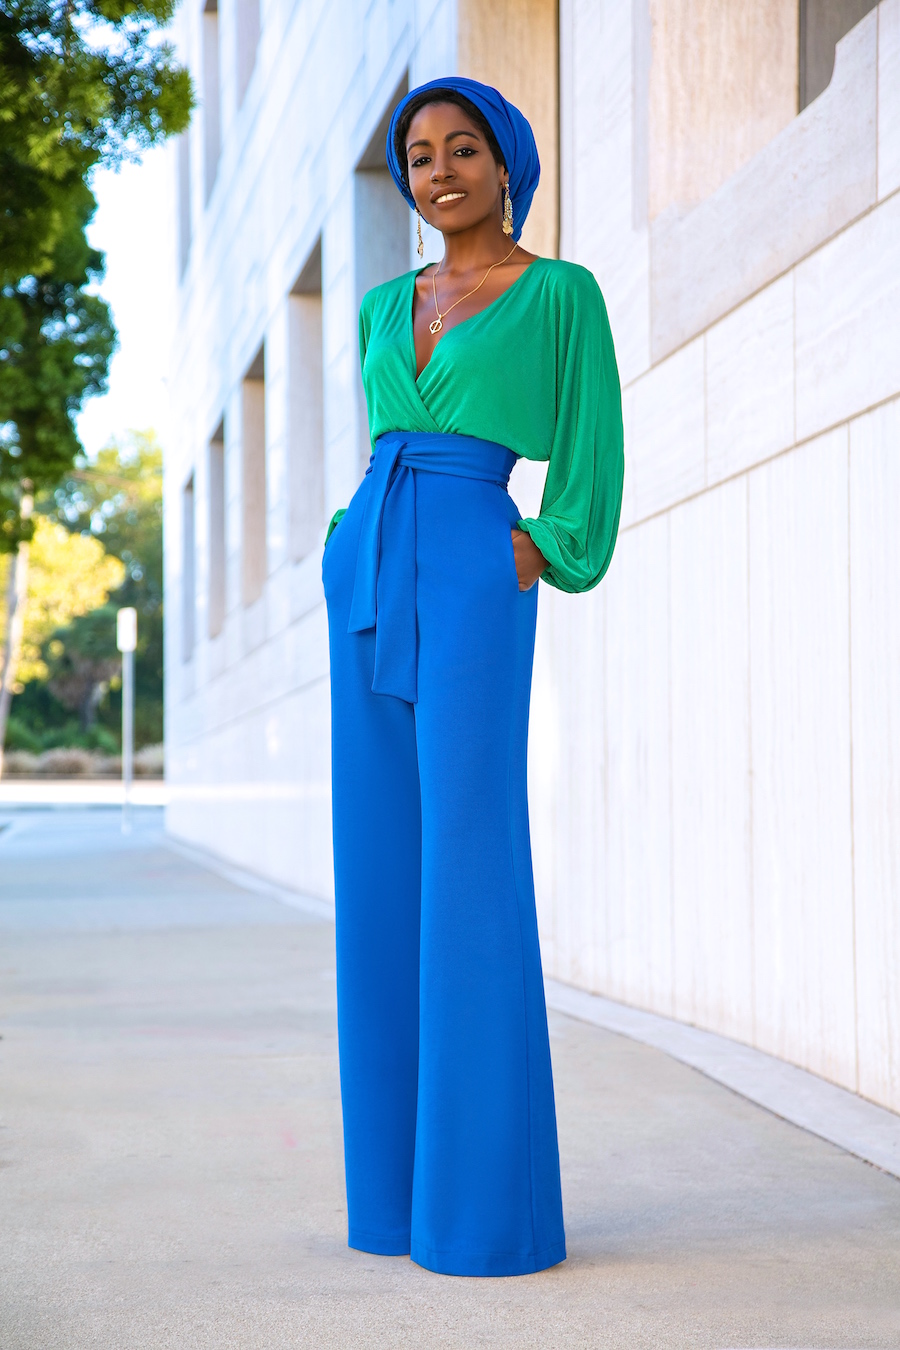 Style Pantry | Billowy Sleeve Bodysuit + Belted High Waist Pants